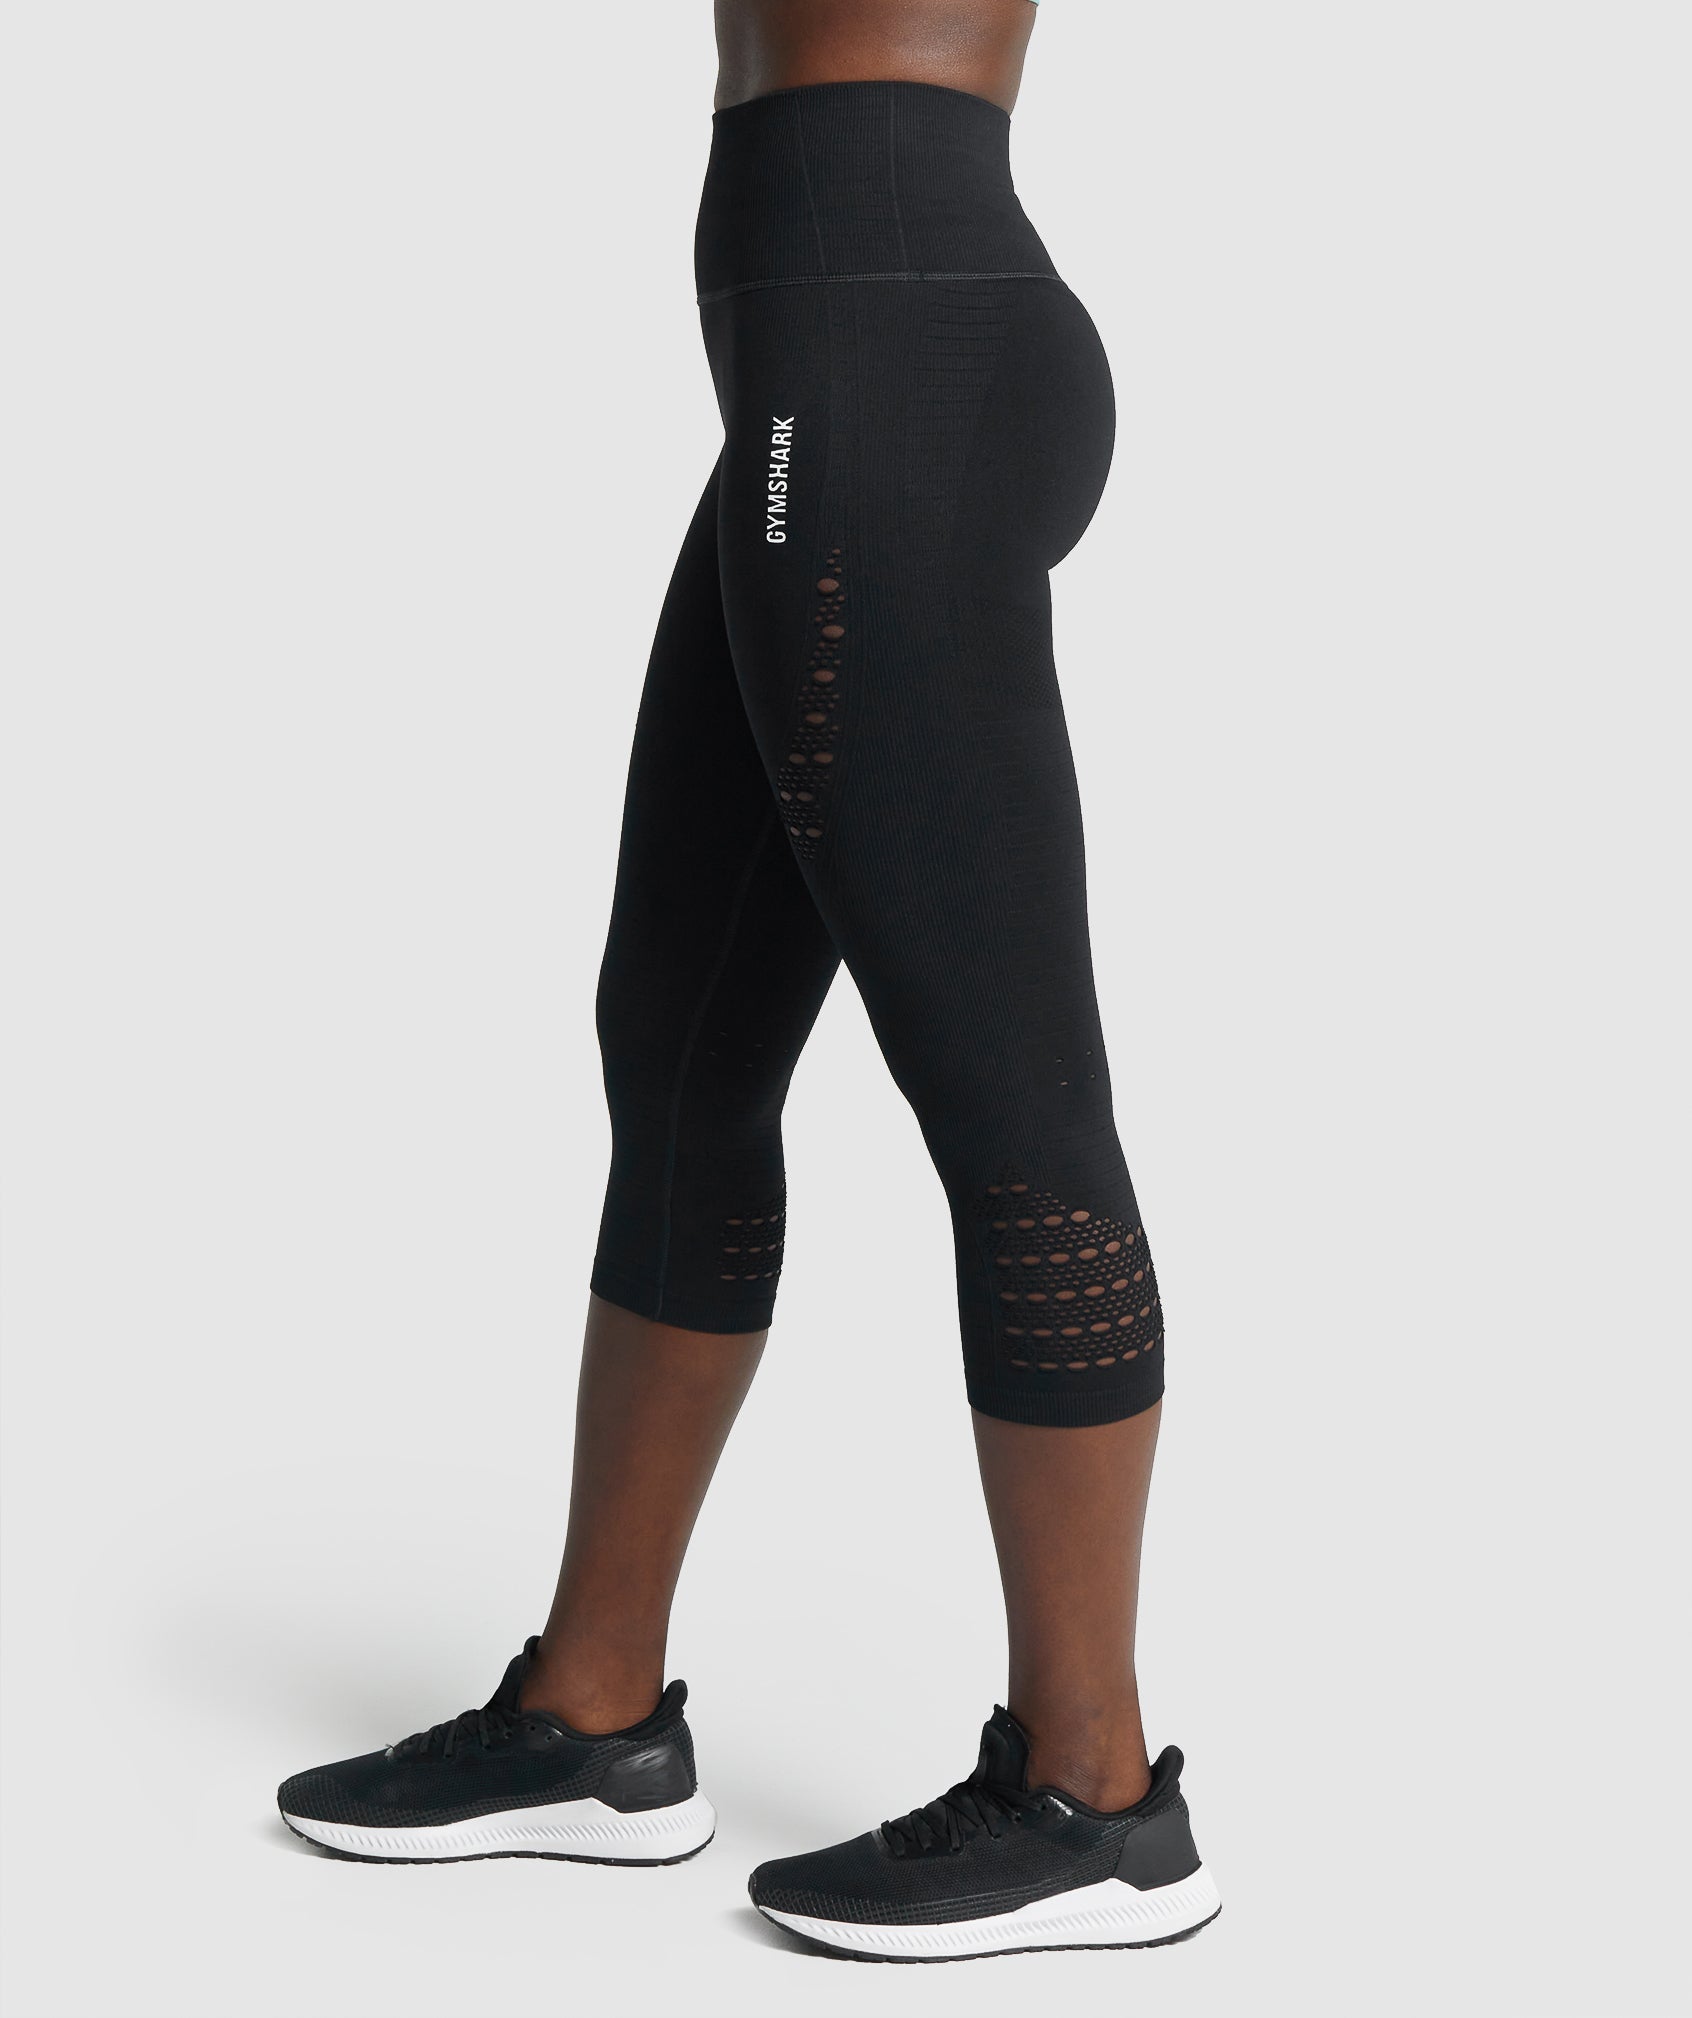 Gymshark Energy Seamless Leggings Small New without tags - $52 - From Trendy